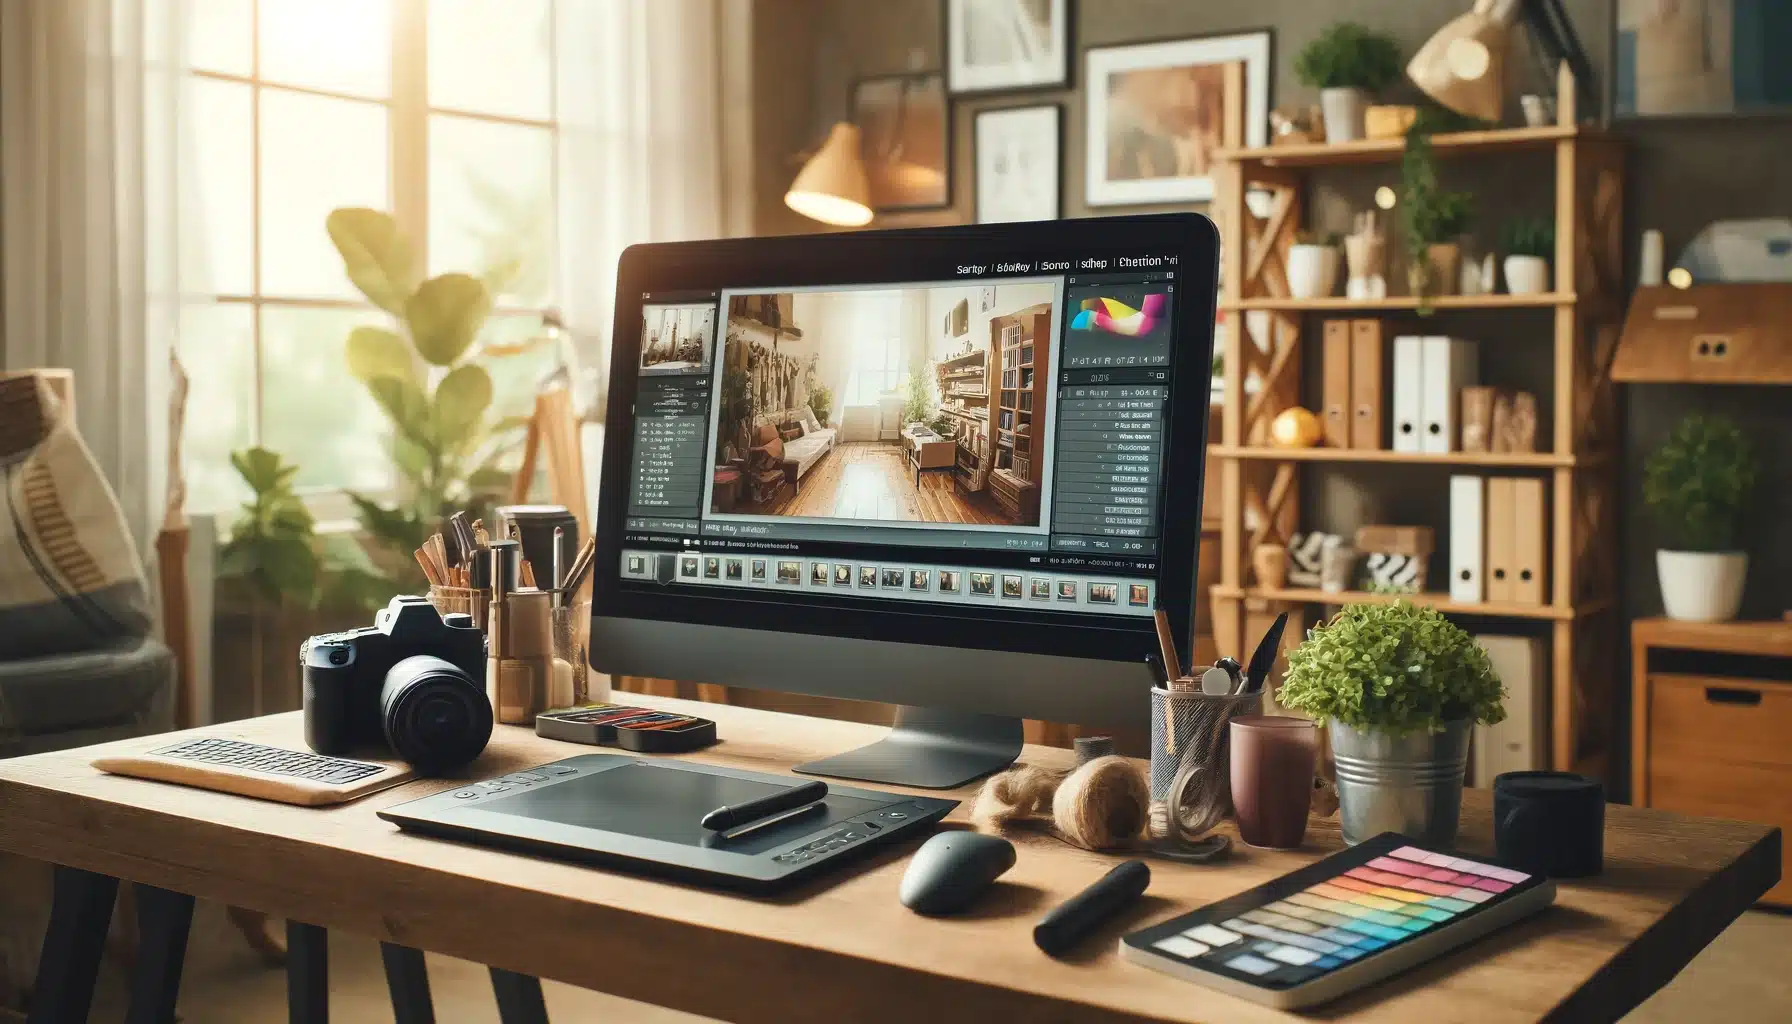 Modern desk setup with a high-resolution monitor displaying Lightroom interfaces, surrounded by photo editing tools and natural lighting.